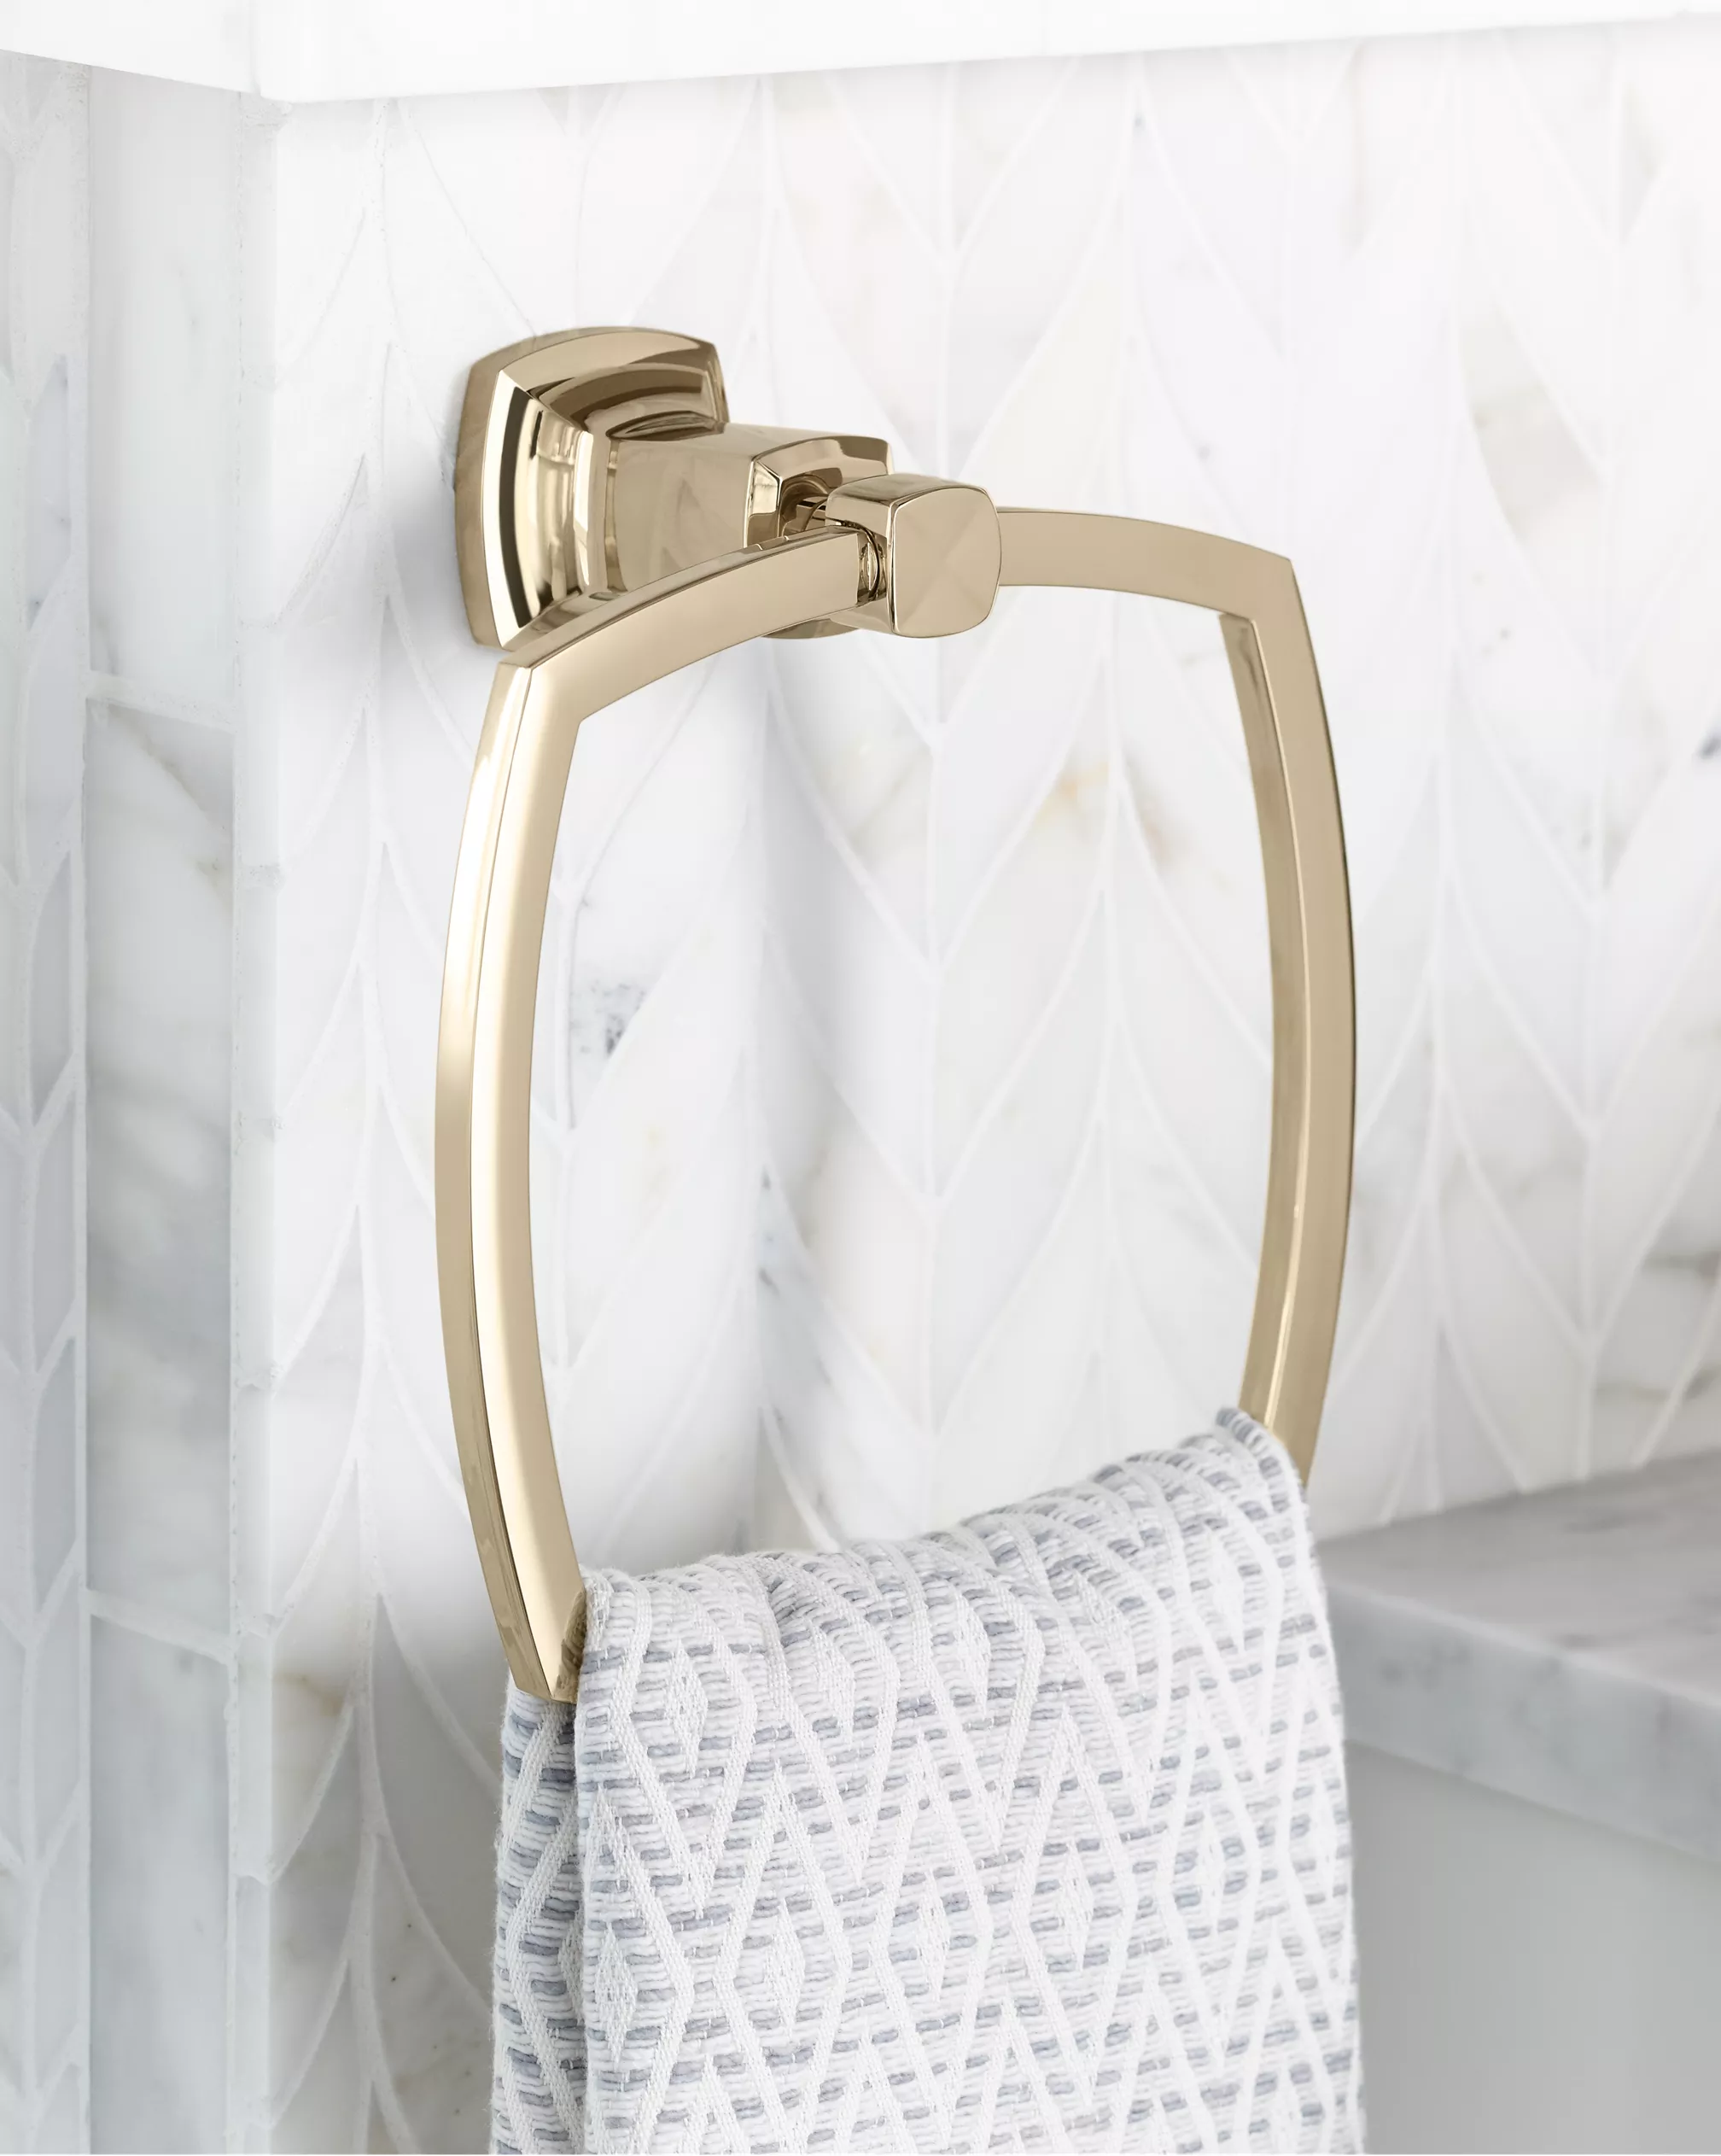 You can now buy a TOILET made out of designer handbags and a gold